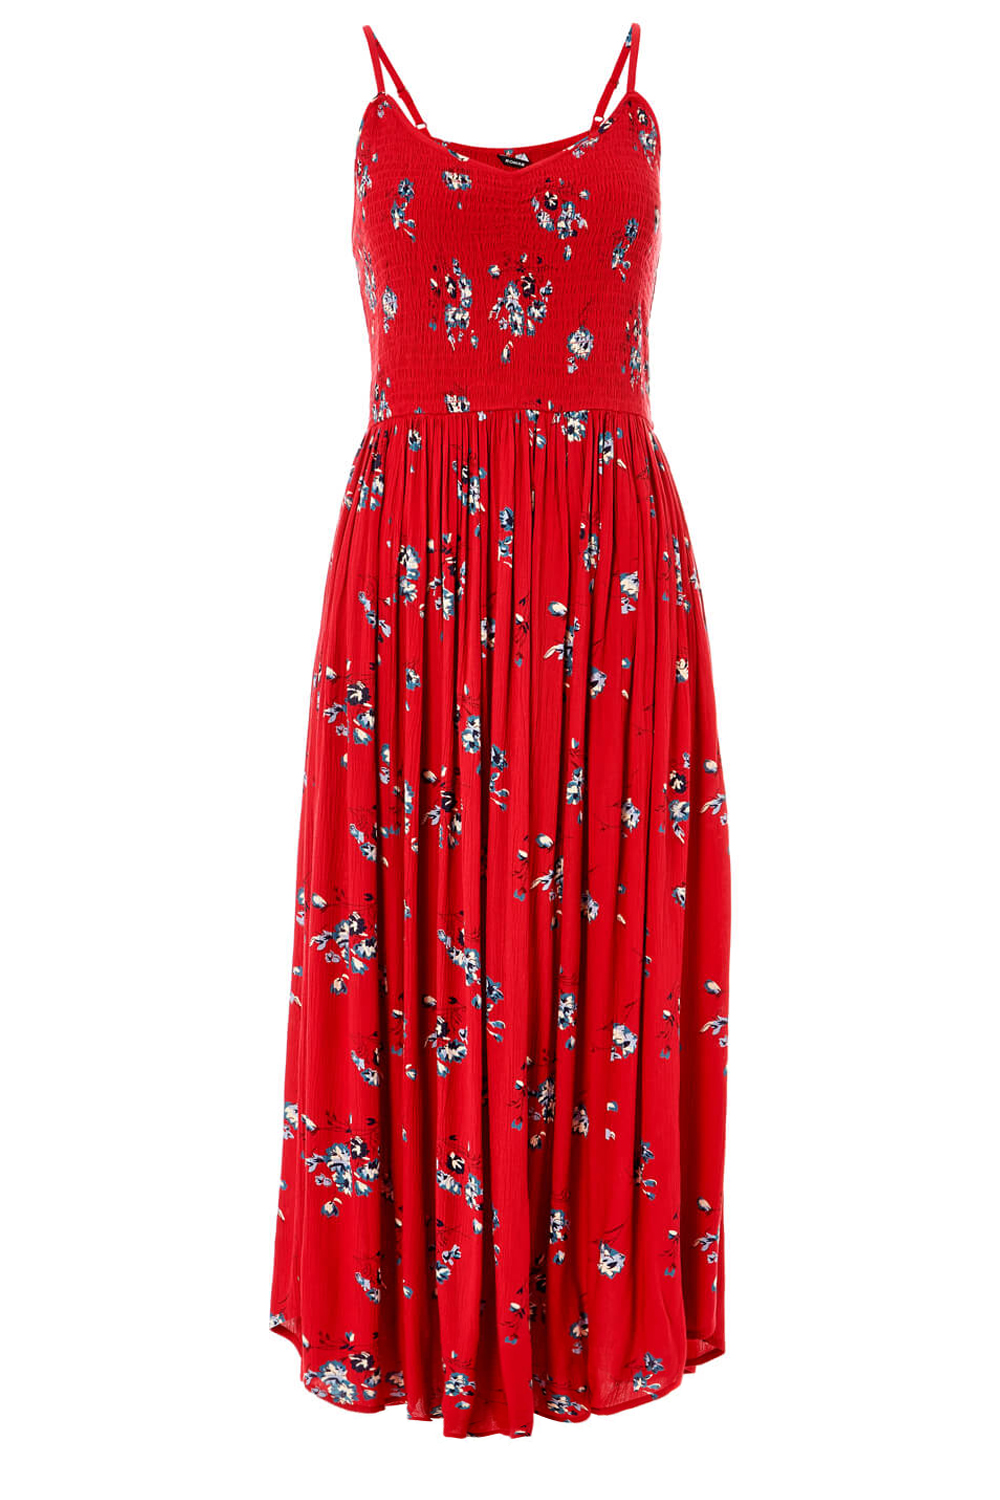 Red Strappy Shirred Floral Midi Dress, Image 4 of 4